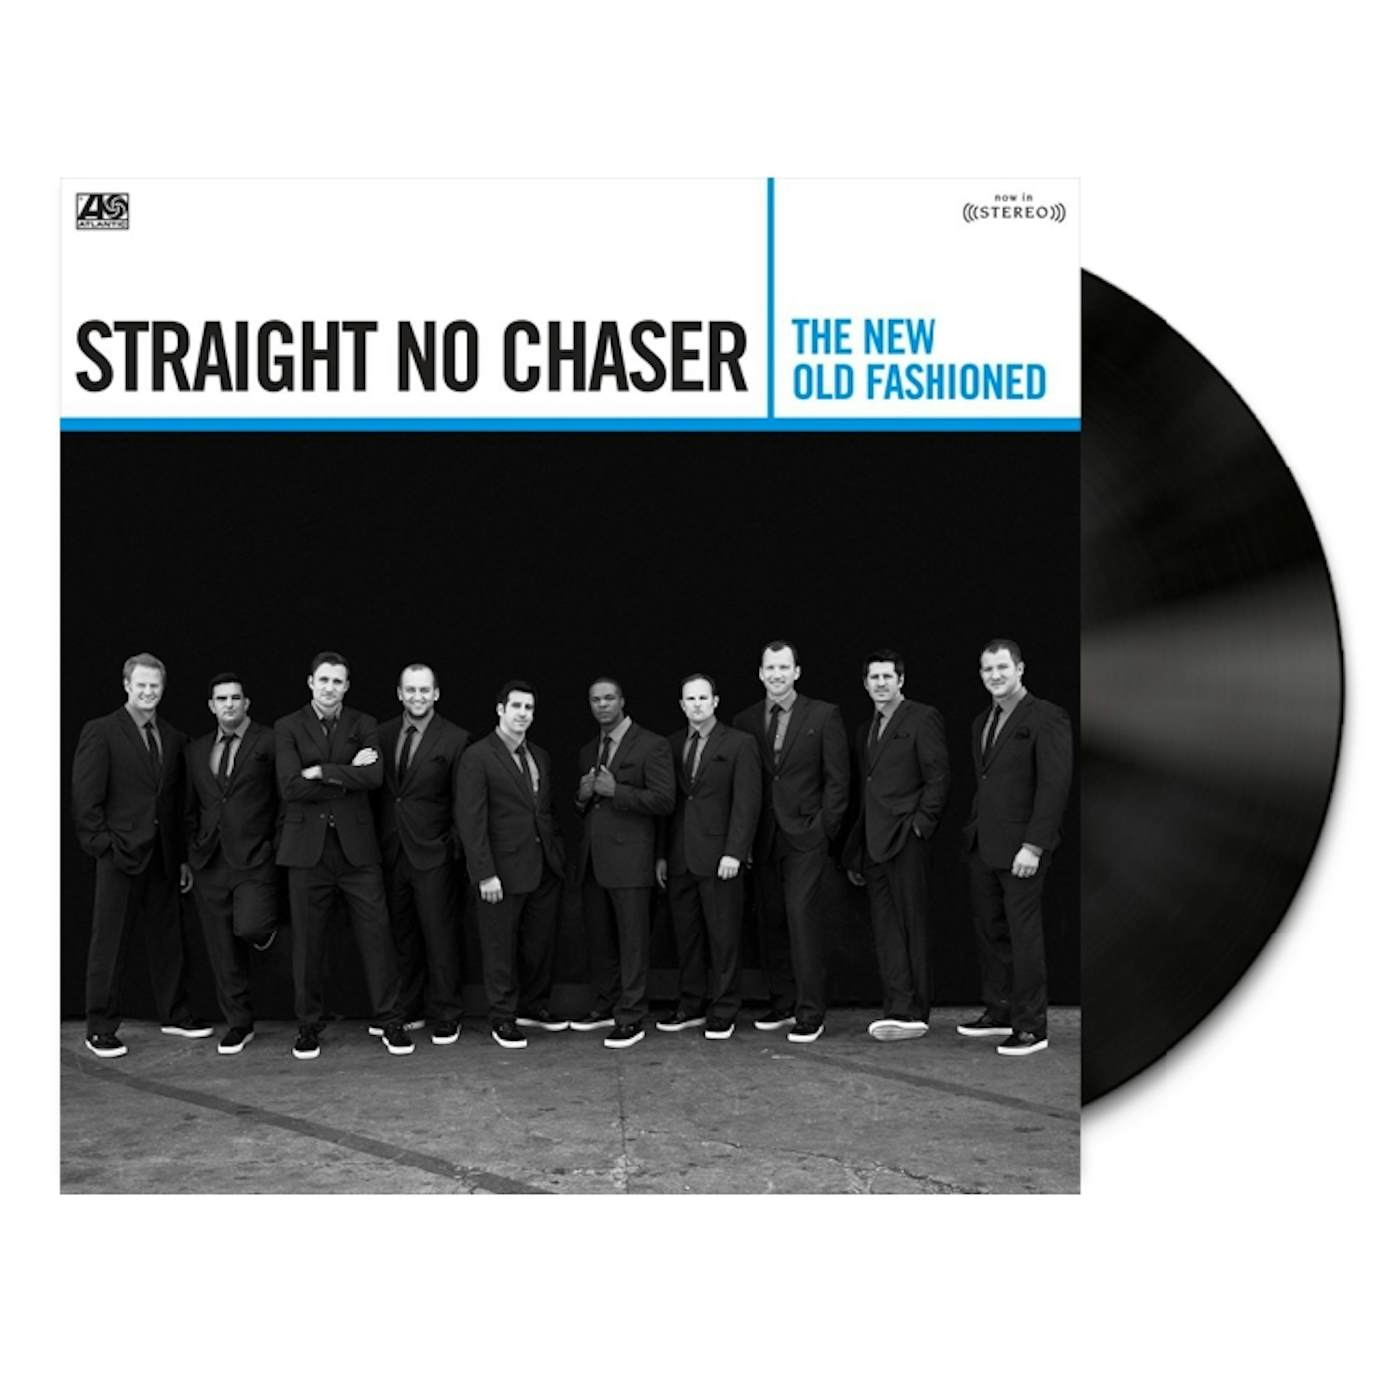 Straight No Chaser The New Old Fashioned (Vinyl LP)